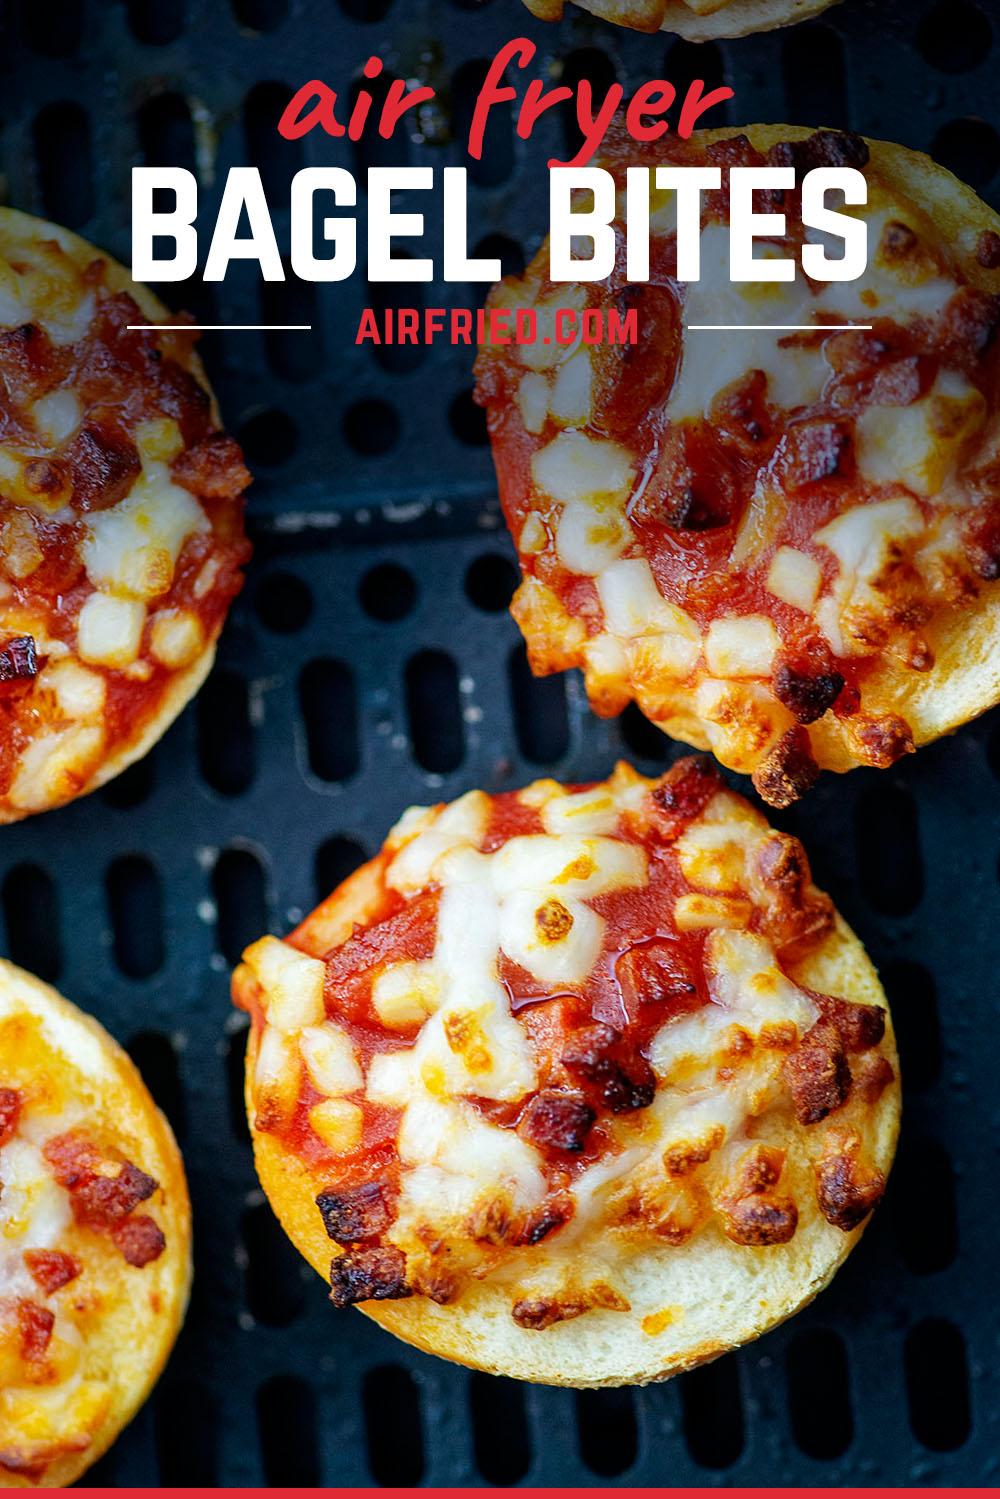 This 10 minute recipe for bagel bites in the air fryer will give you evenly cooked, crisp bagel bites every time!